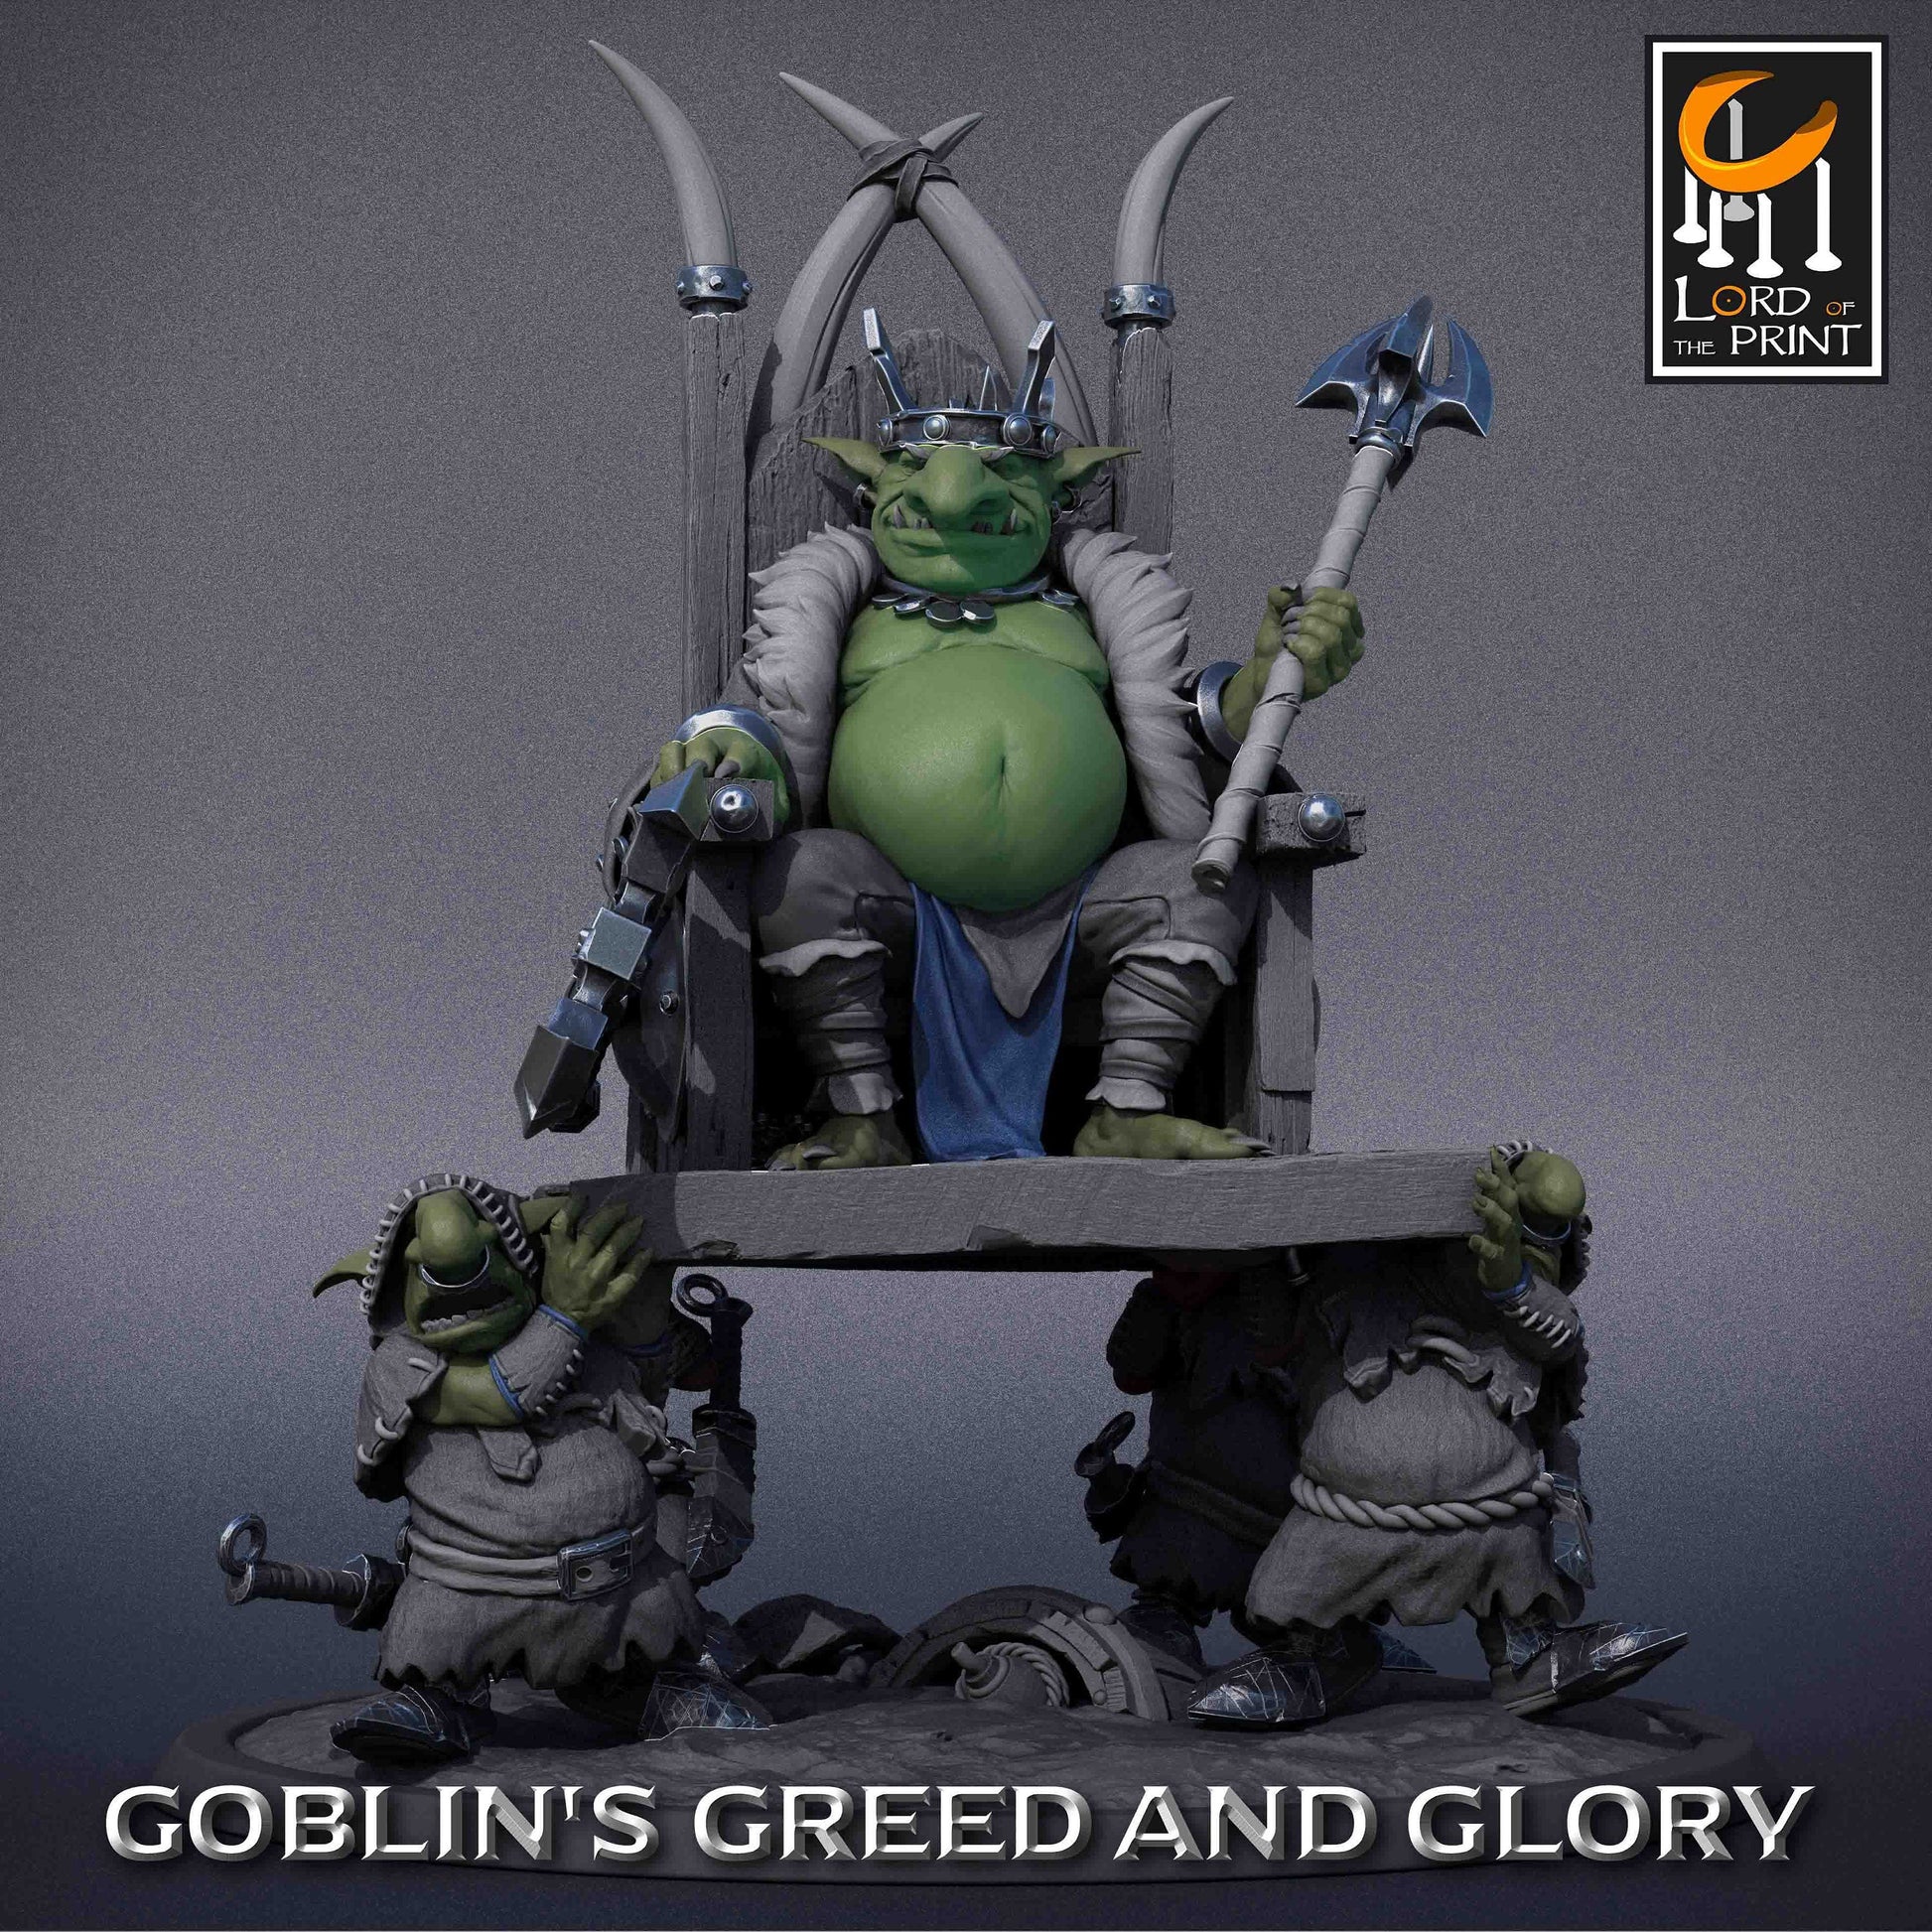 Goblin King | RPG Miniature for Dungeons and Dragons|Pathfinder|Tabletop Wargaming | Goblin Miniature | Lord of the Print